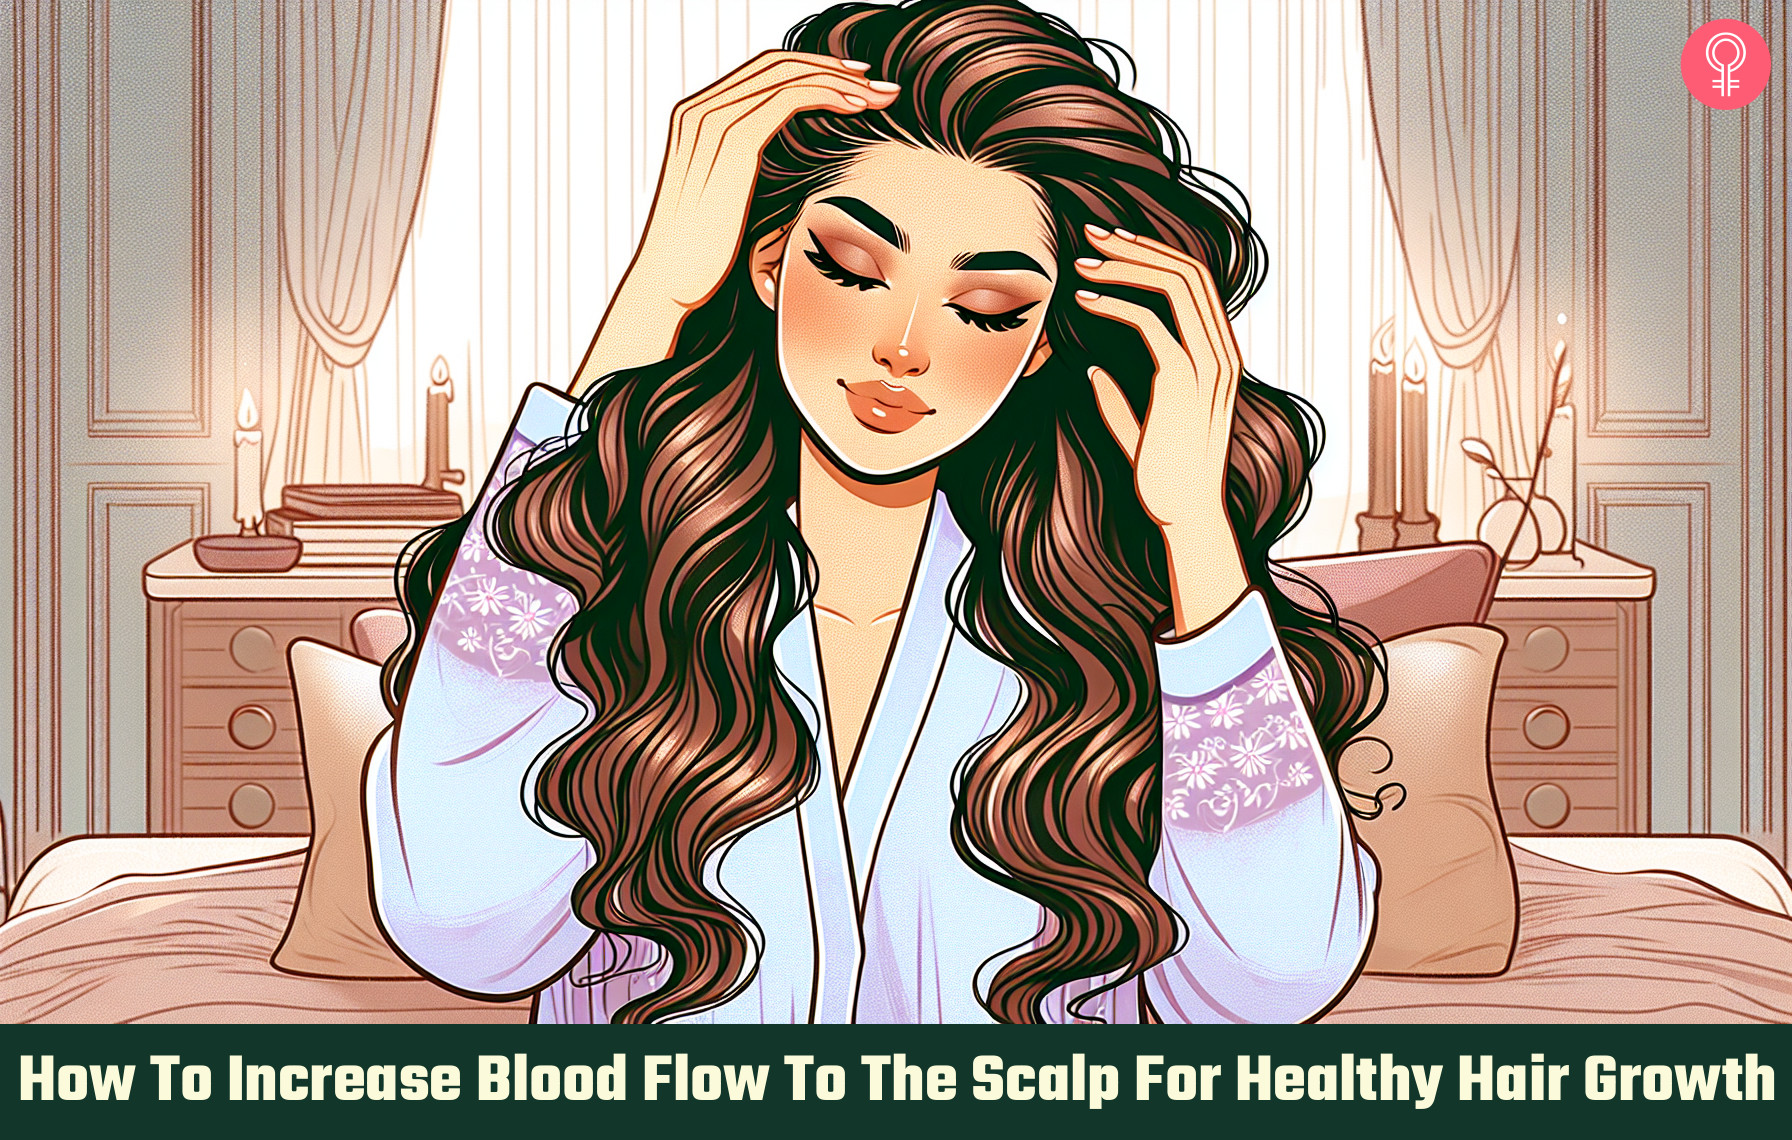 Increase Blood Flow To The Scalp